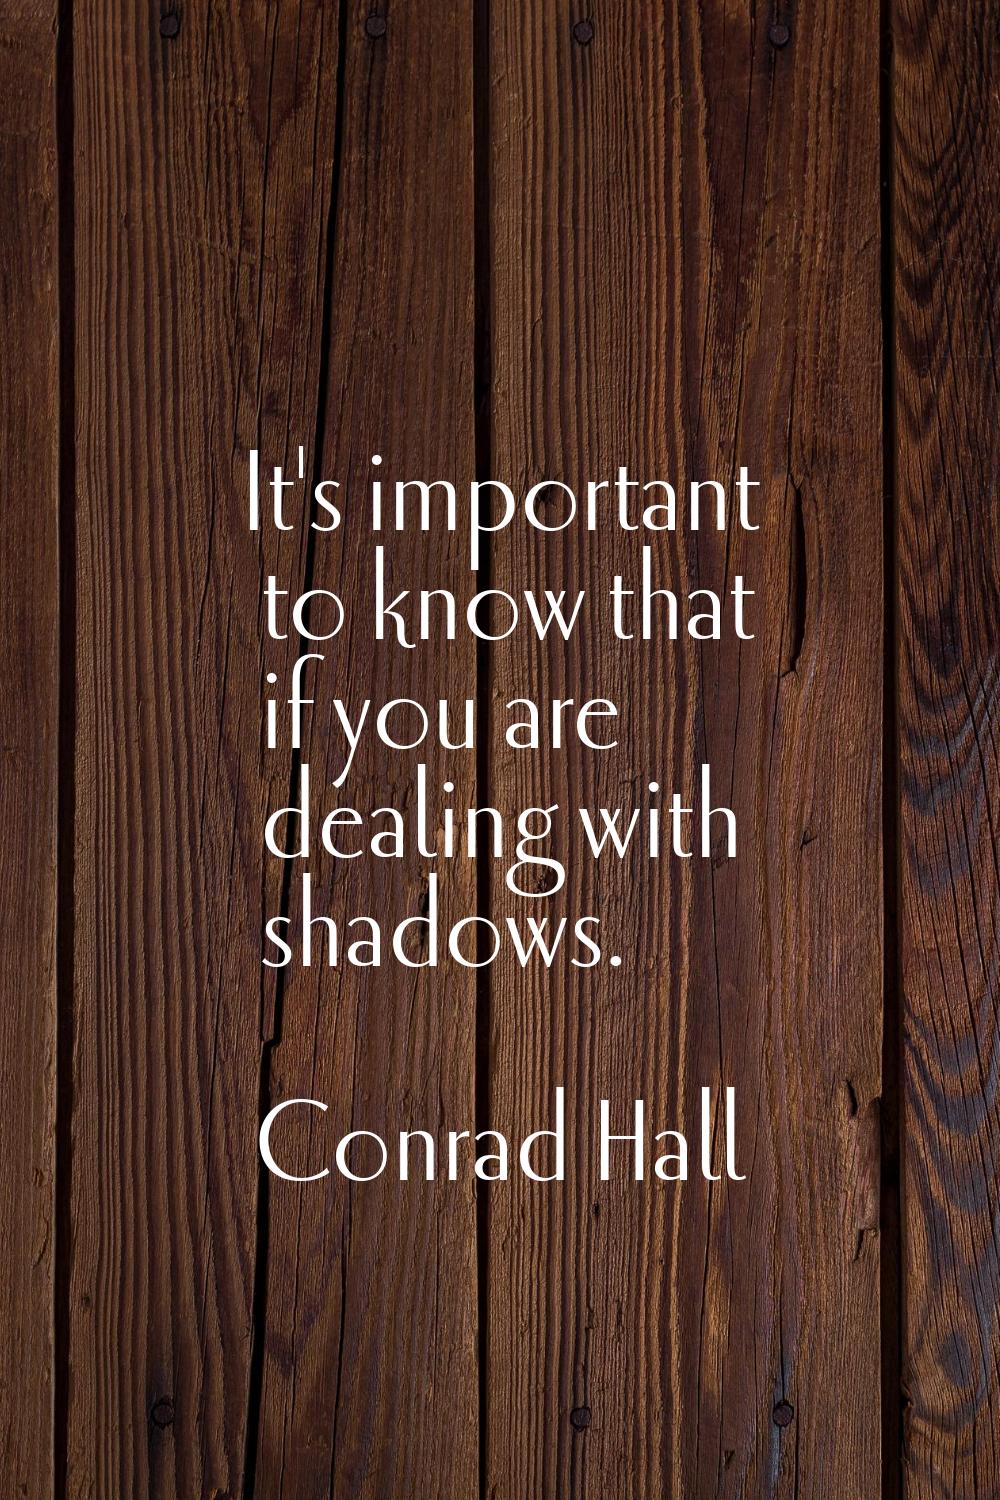 It's important to know that if you are dealing with shadows.